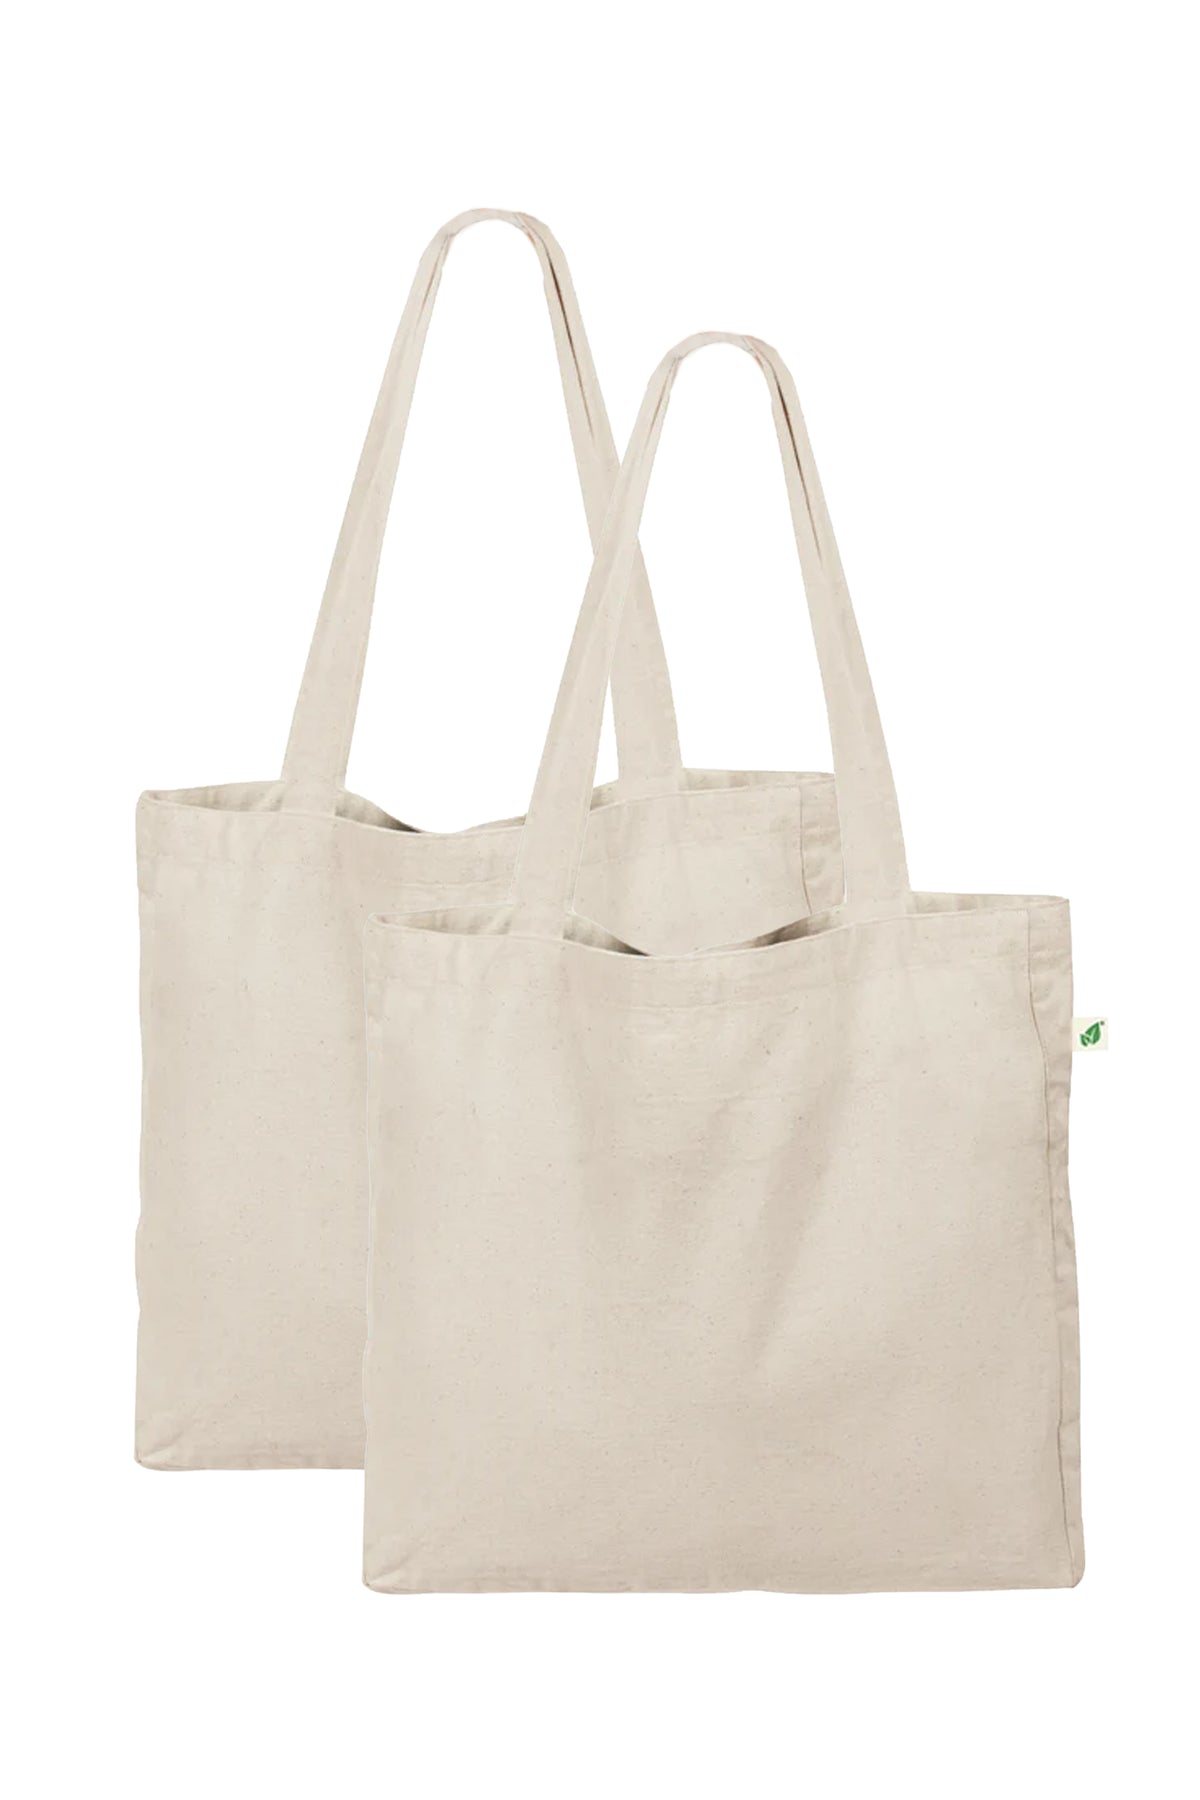 Organic Cotton Tote Bag With Gusset - 2 Pack – sustainme.in